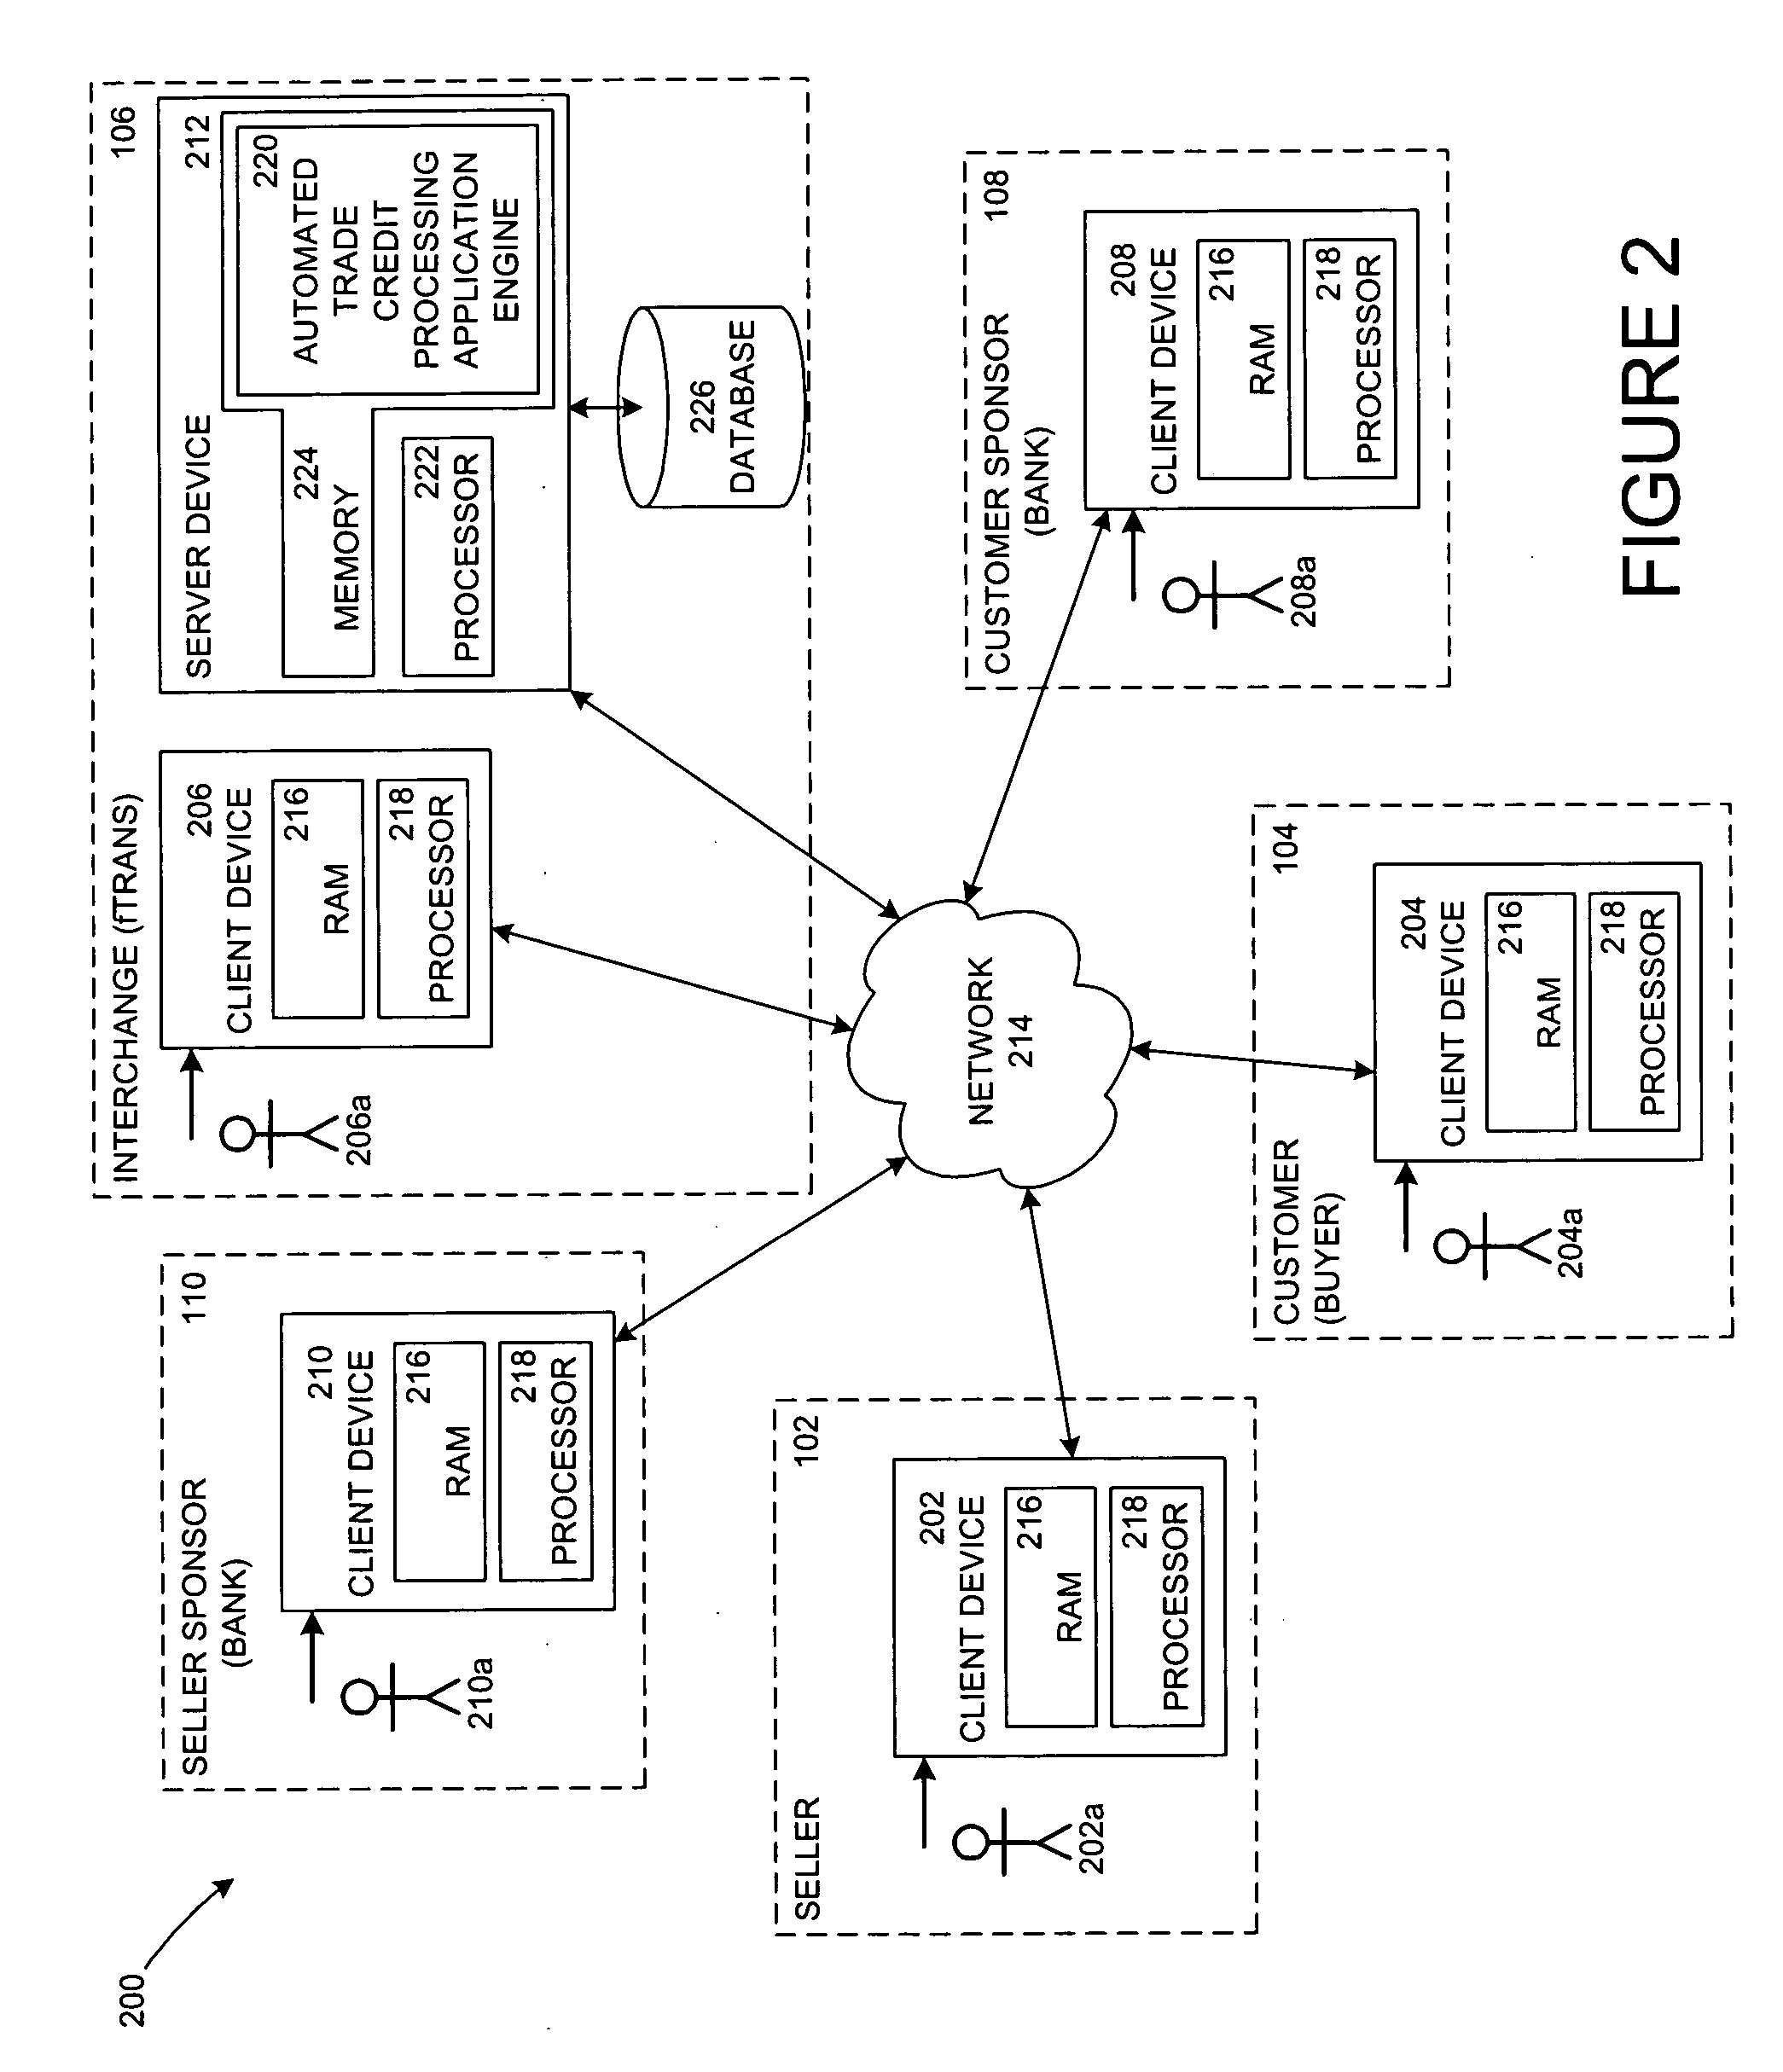 Systems and methods for automated processing, handling, and facilitating a trade credit transaction